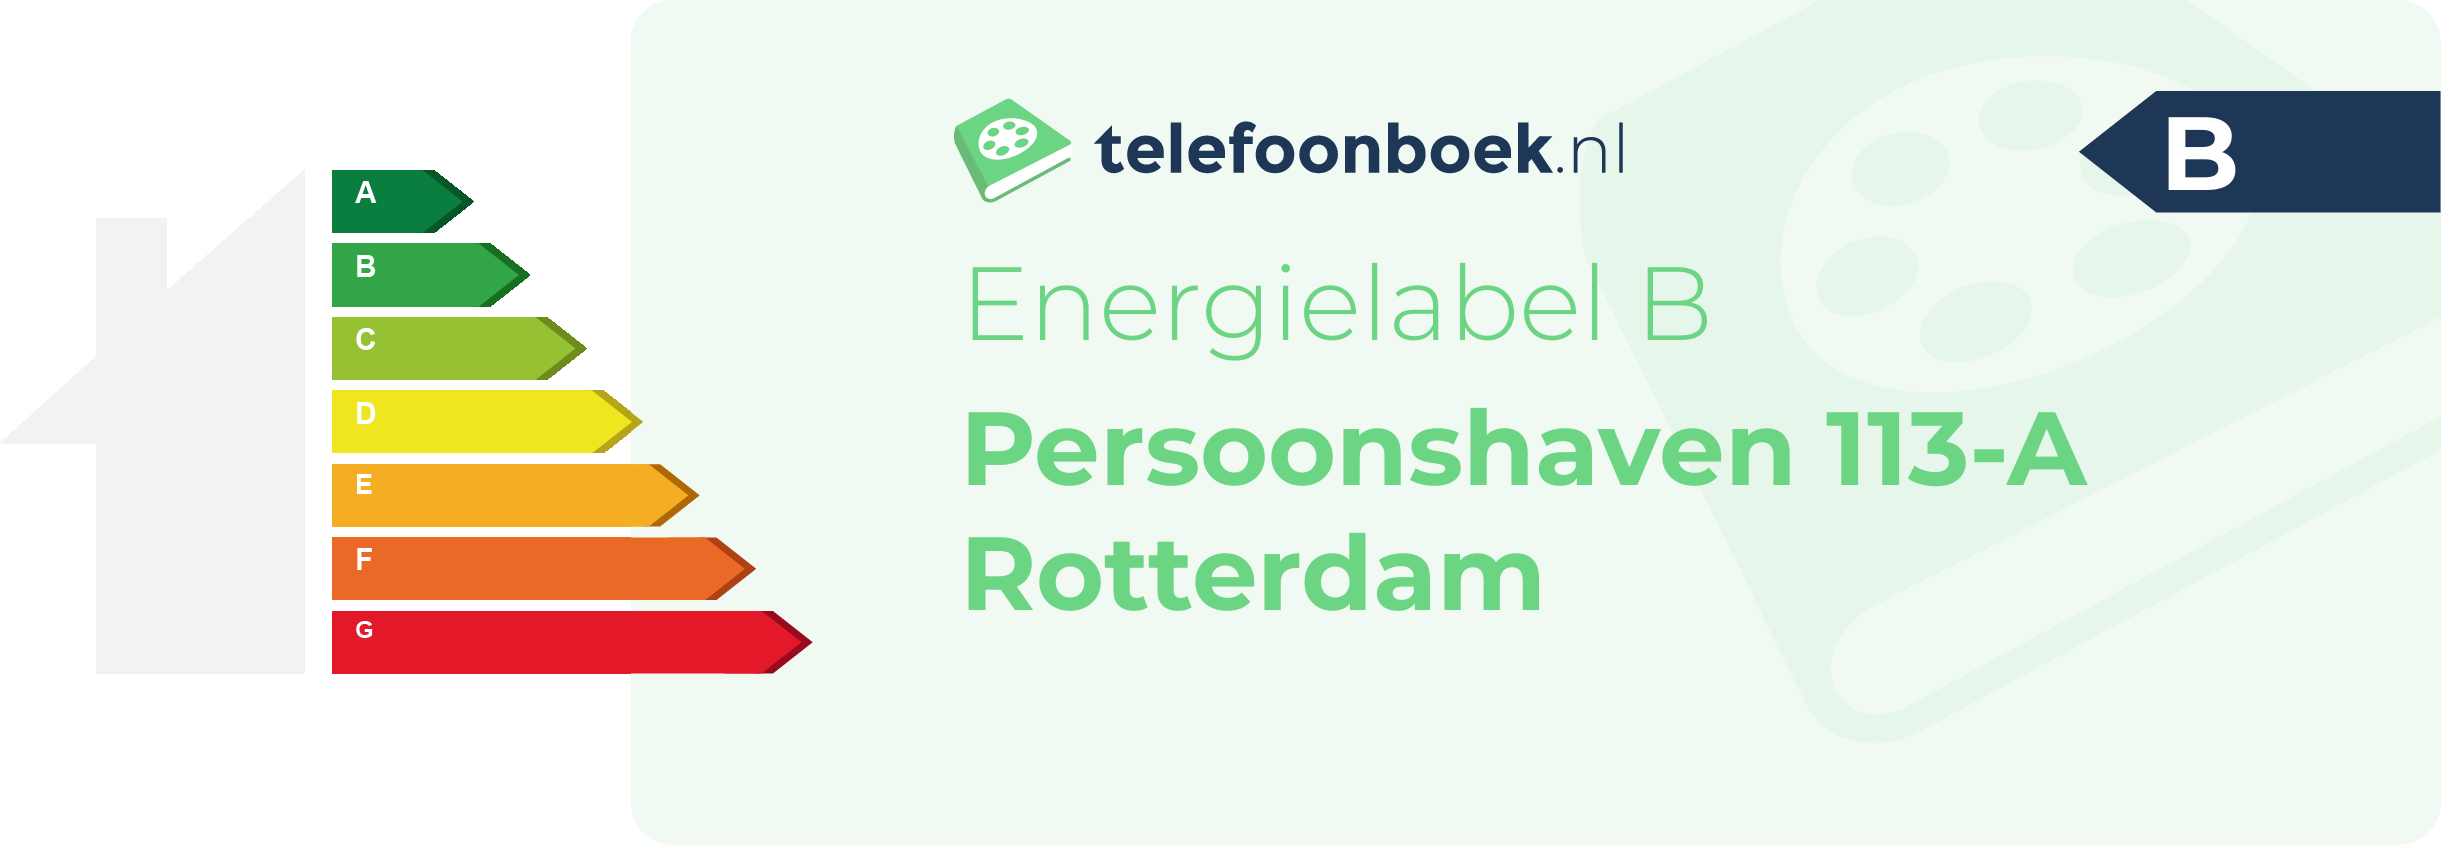 Energielabel Persoonshaven 113-A Rotterdam